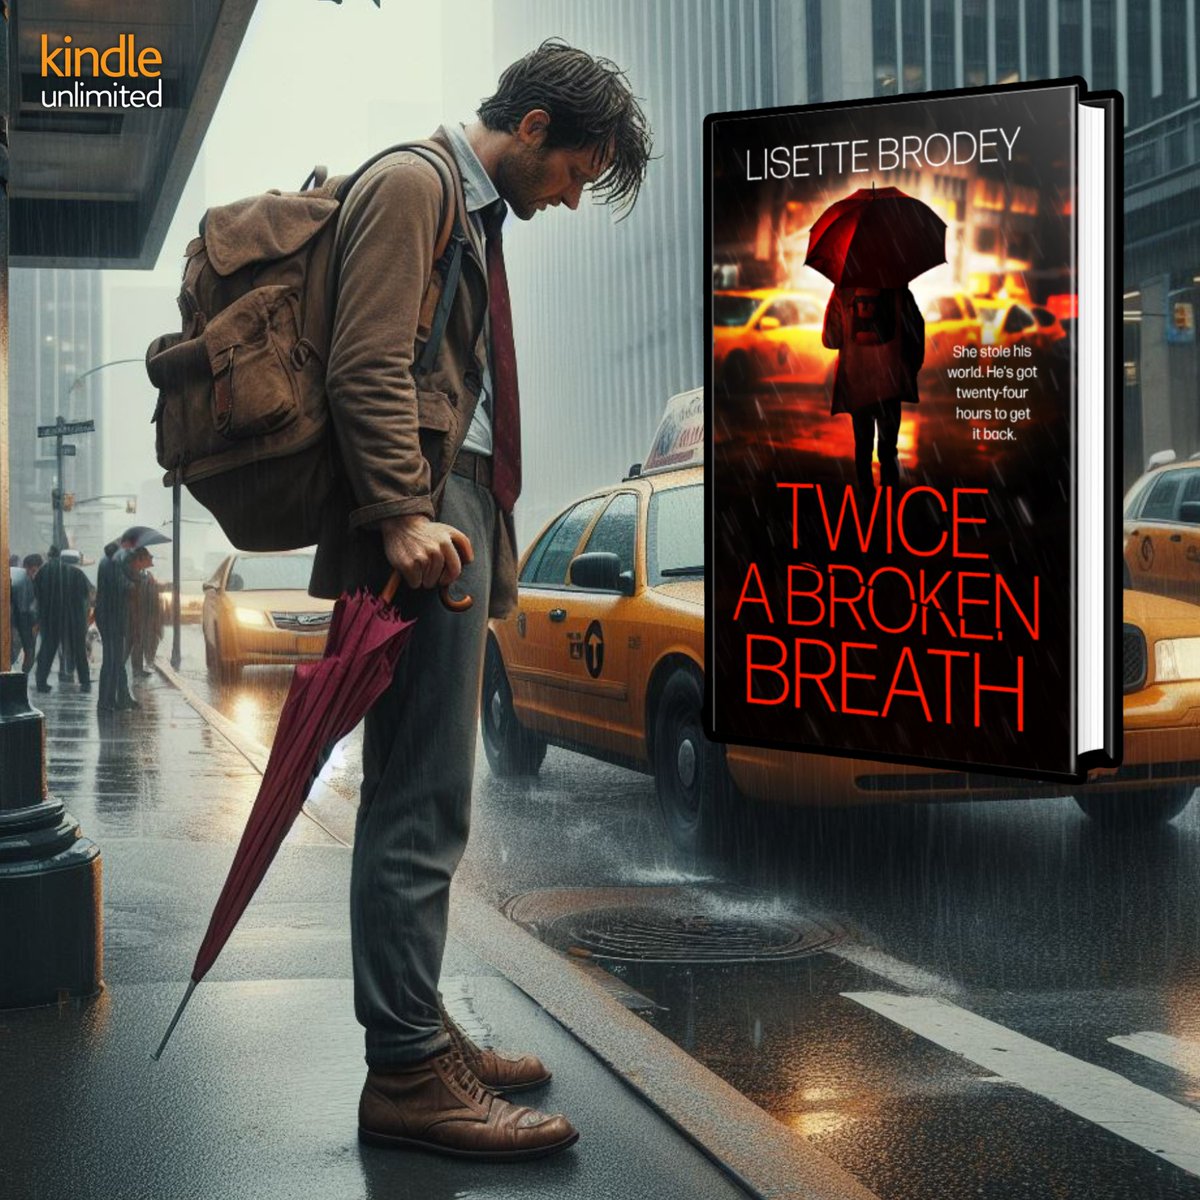 TWICE A BROKEN BREATH 📕 Discovering his wife has left and taken their 8 y/o daughter, frantic, Liam leaves NJ for NYC, arriving at Penn Station with no clue what his next move is. 🚖🌆 mybook.to/TwiceBroken #suspense✨#thriller✨ #KU